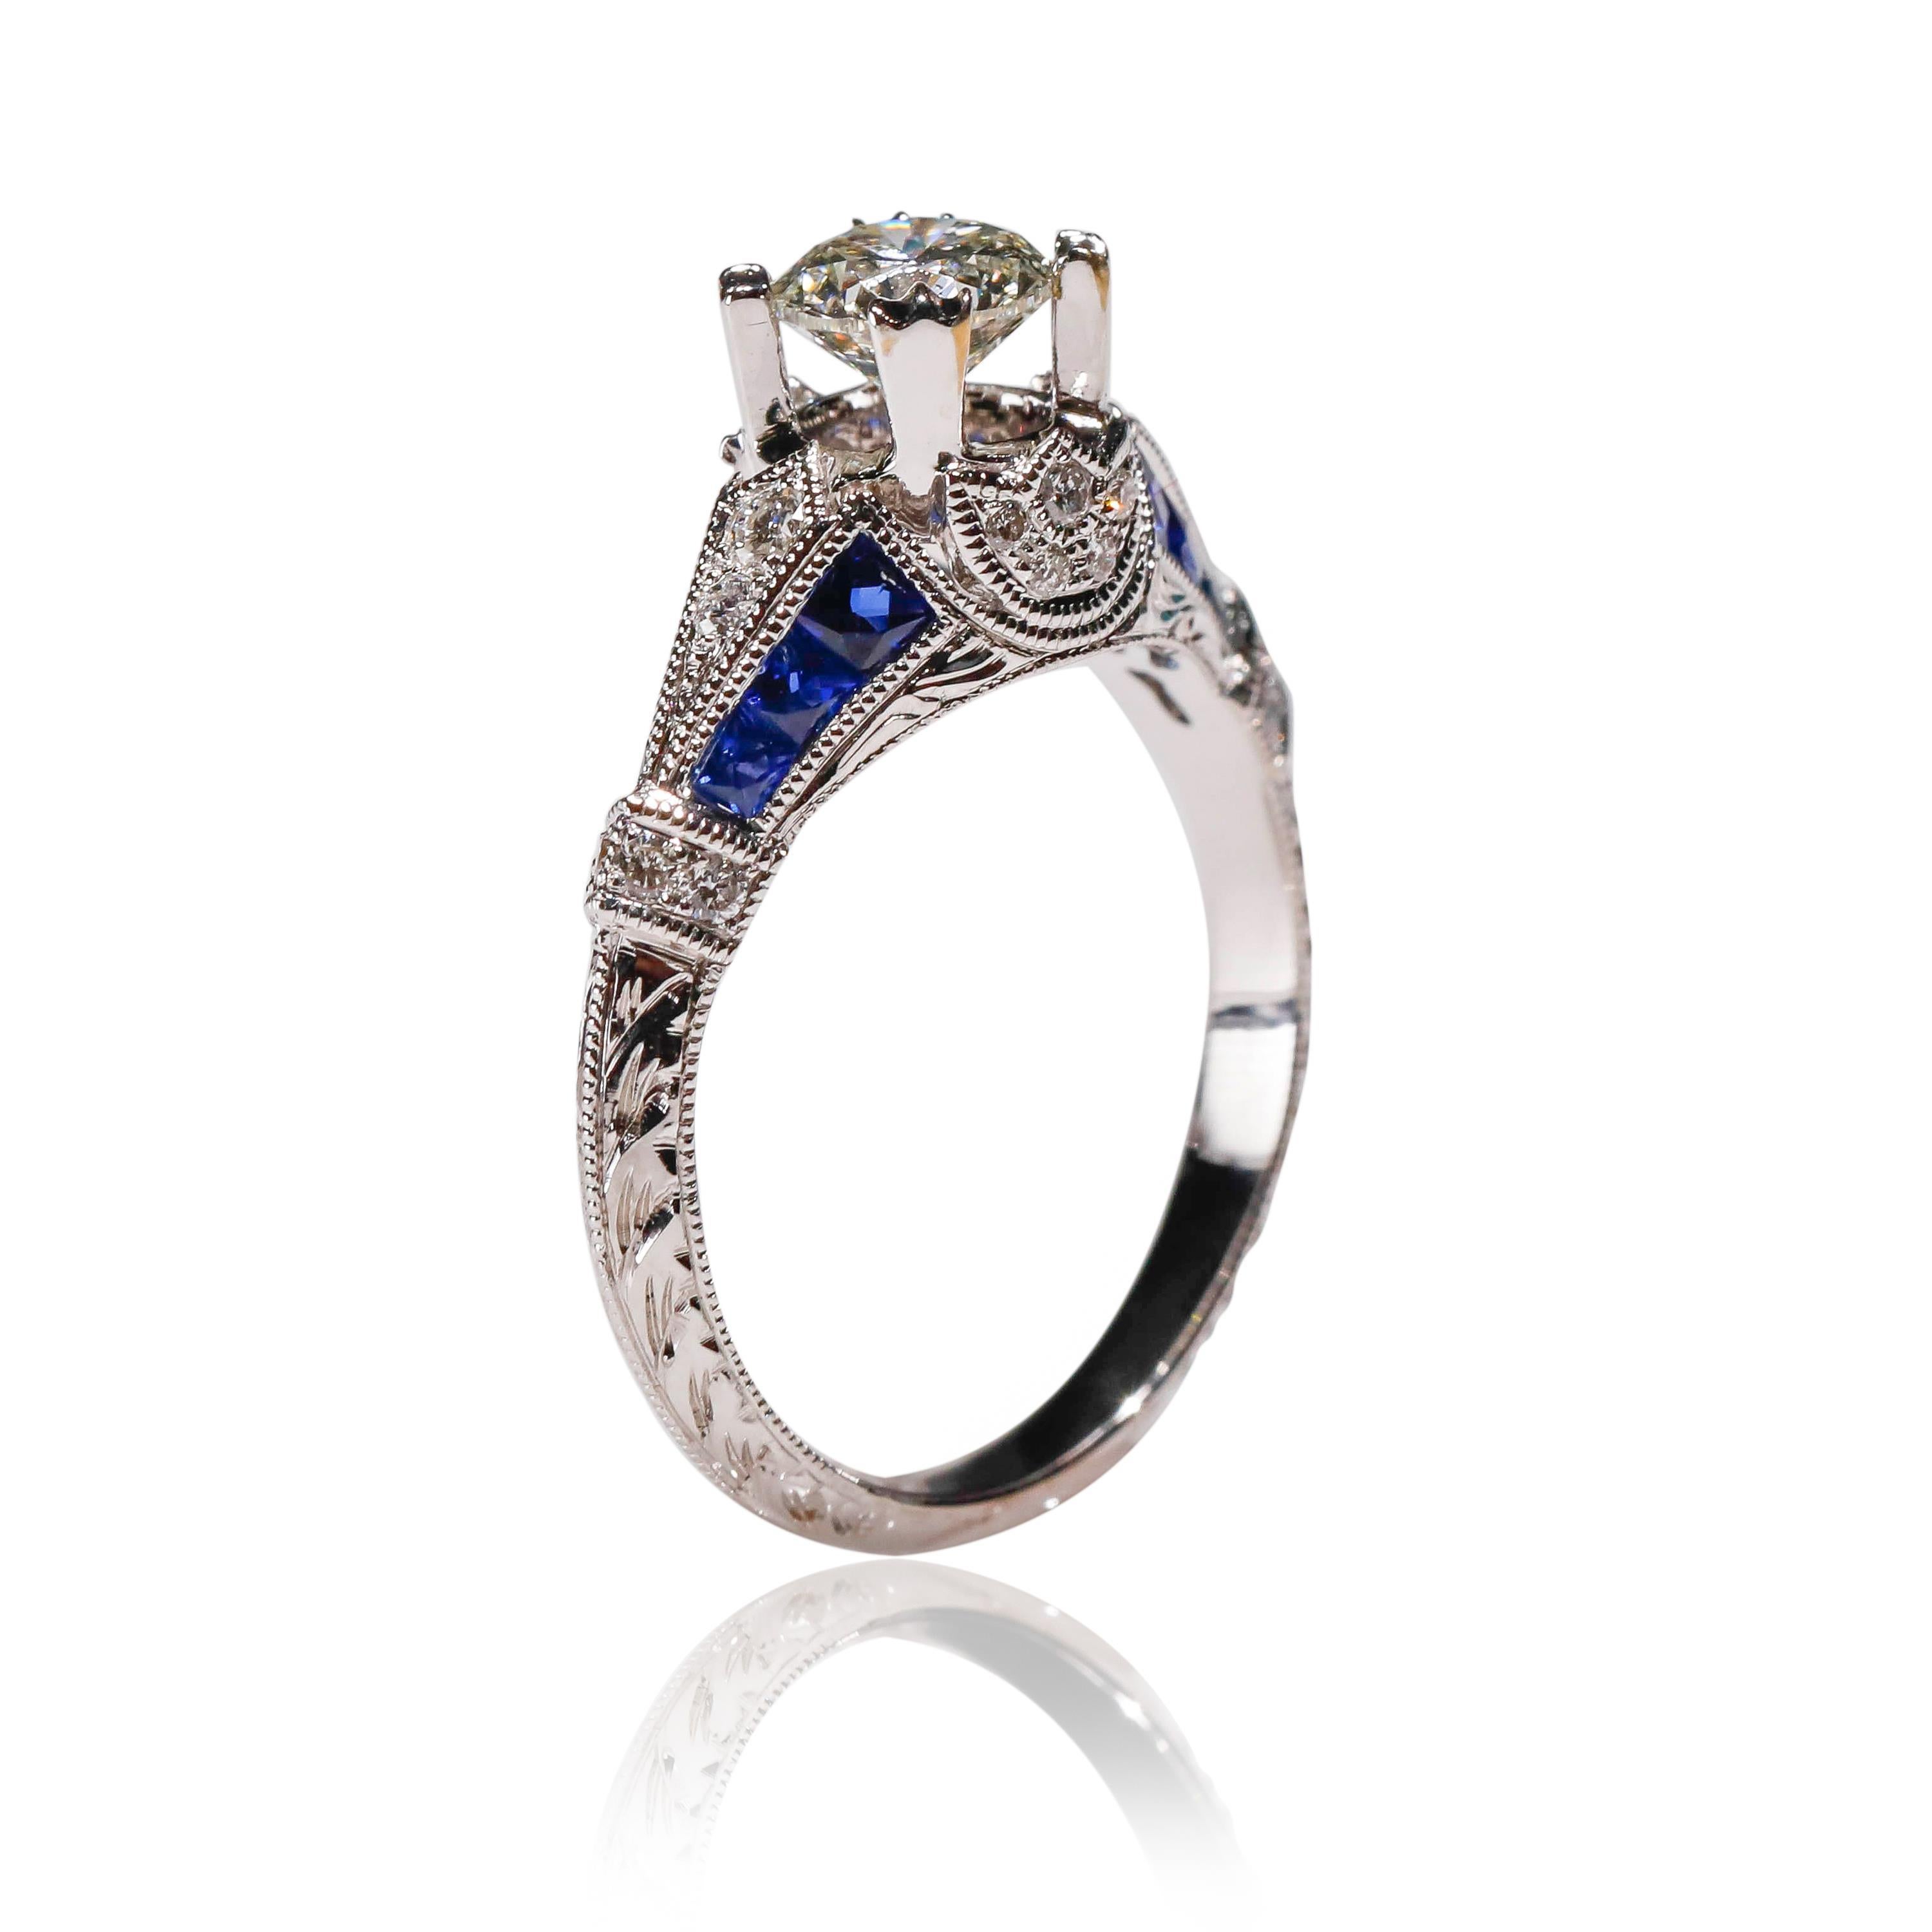 18 Karat White Gold 1.03 Ct Diamond 0.22 Ct Sapphire Engagement Ring

Triple cluster halo diamond engagement ring. Fashioned in white gold, is the perfect way to say 